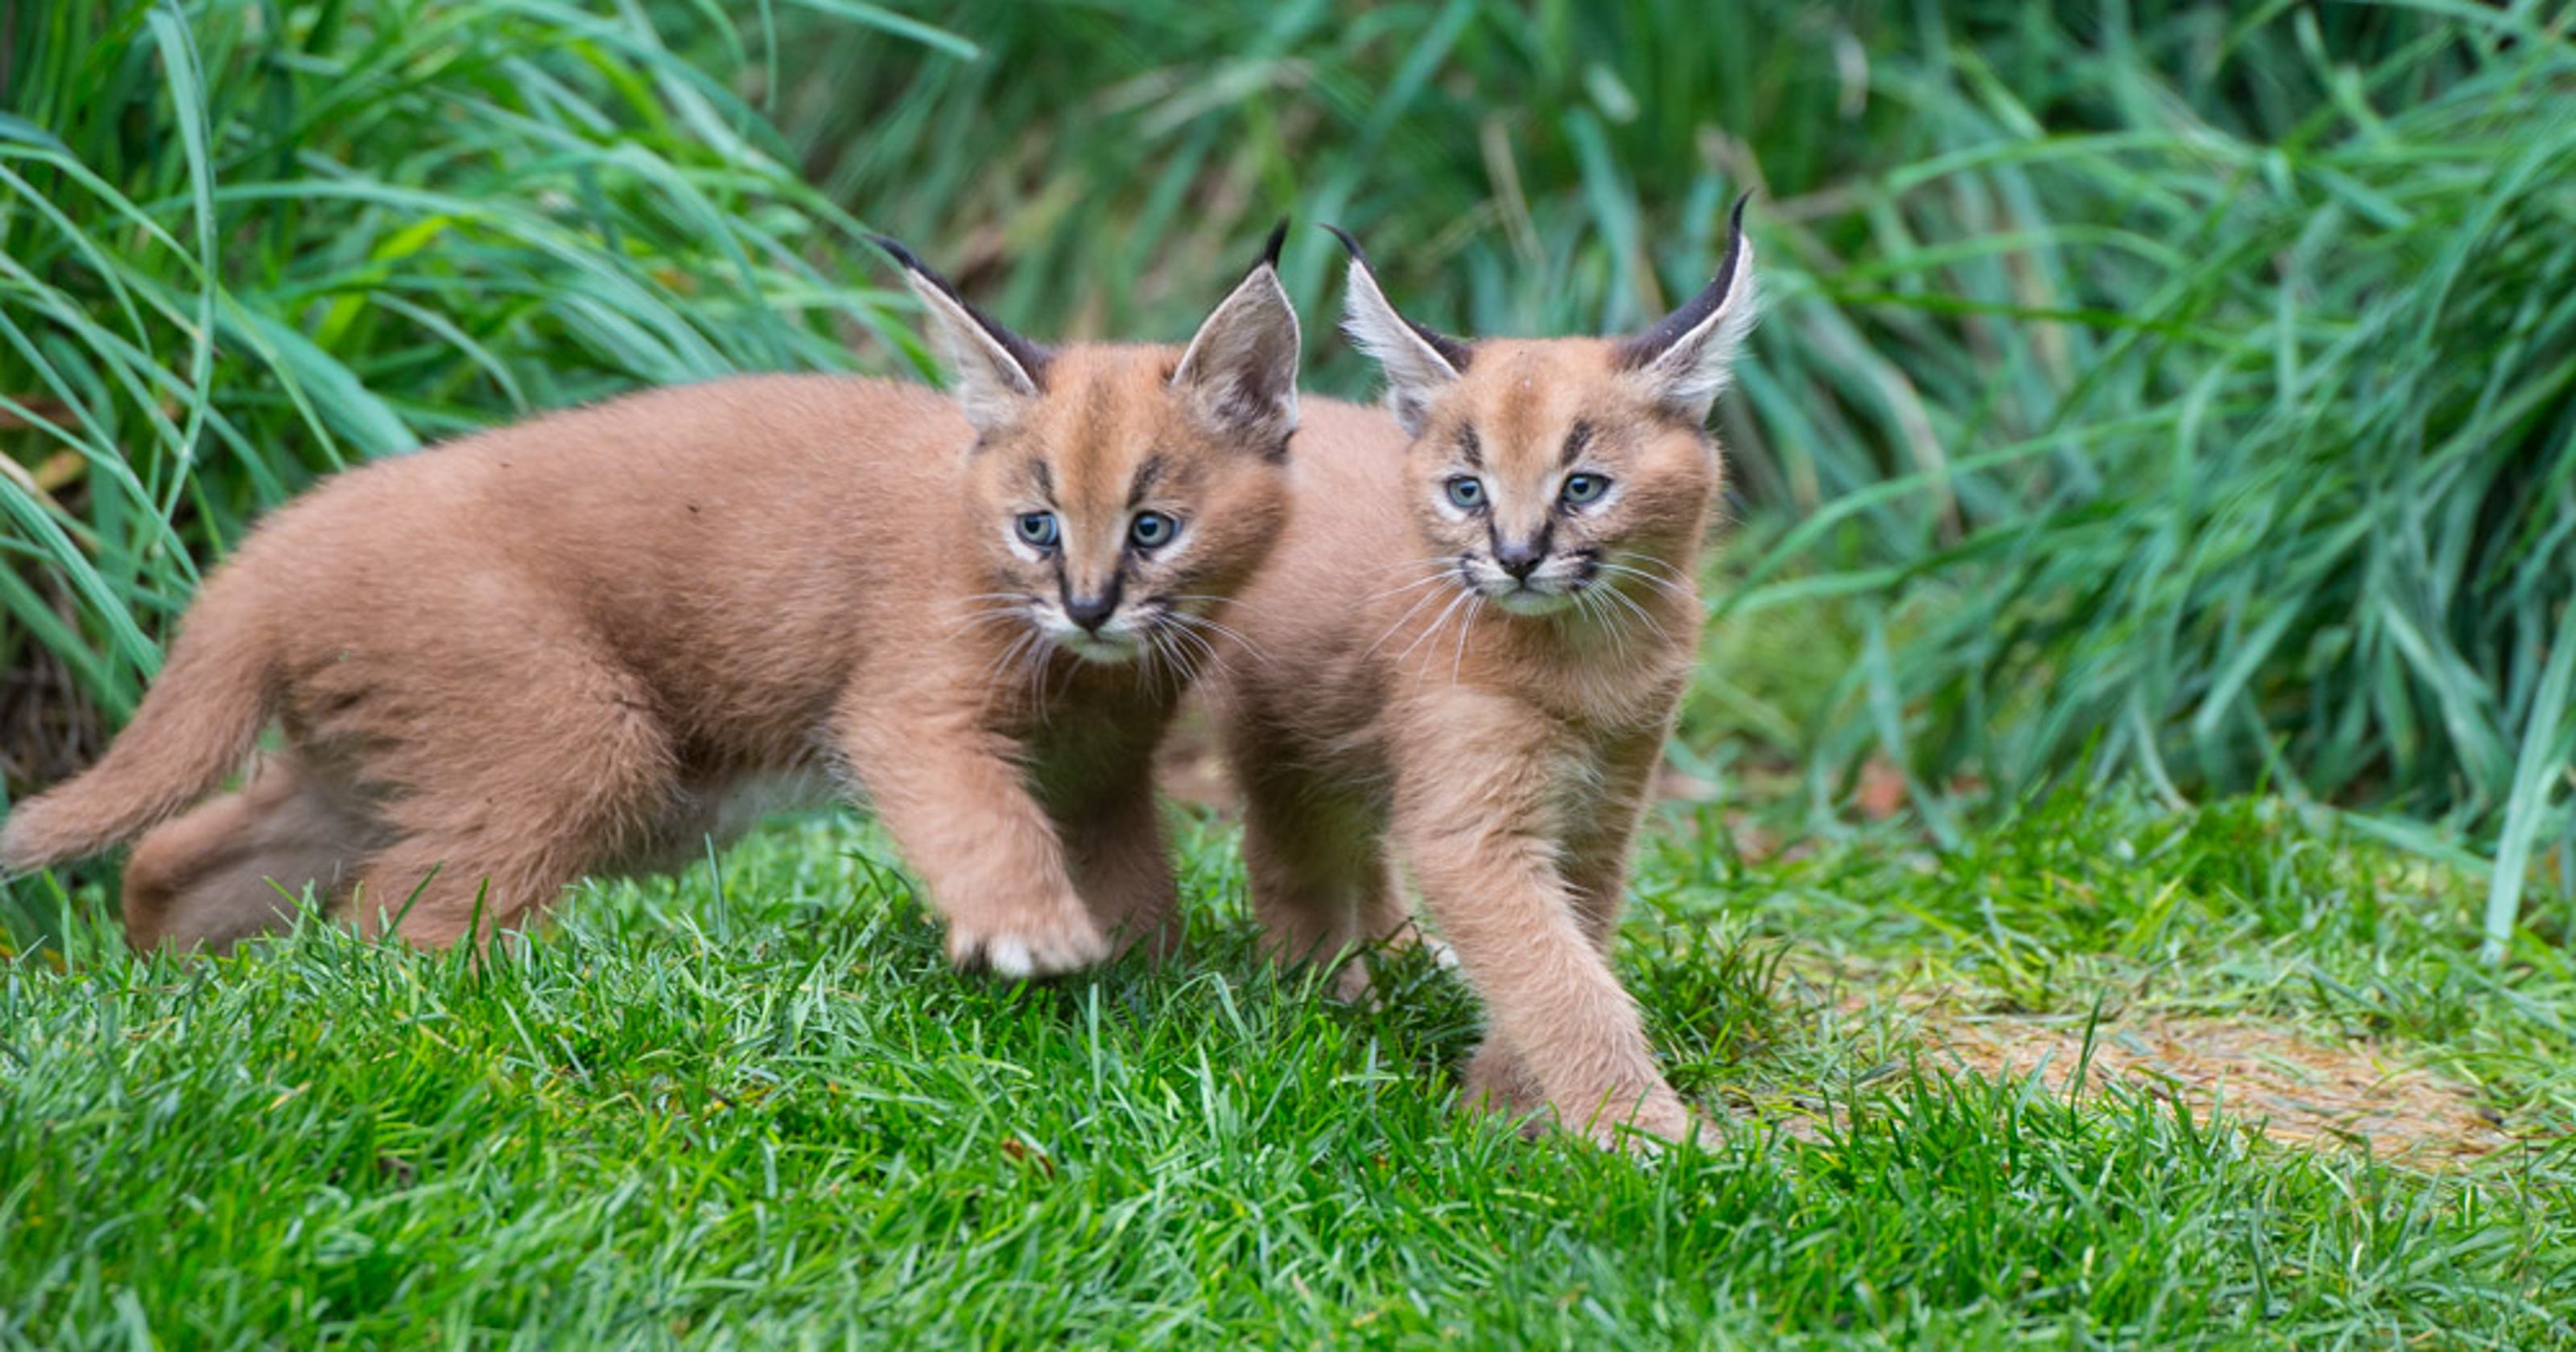 Caracal kittens exploring outdoor space at Oregon Zoo